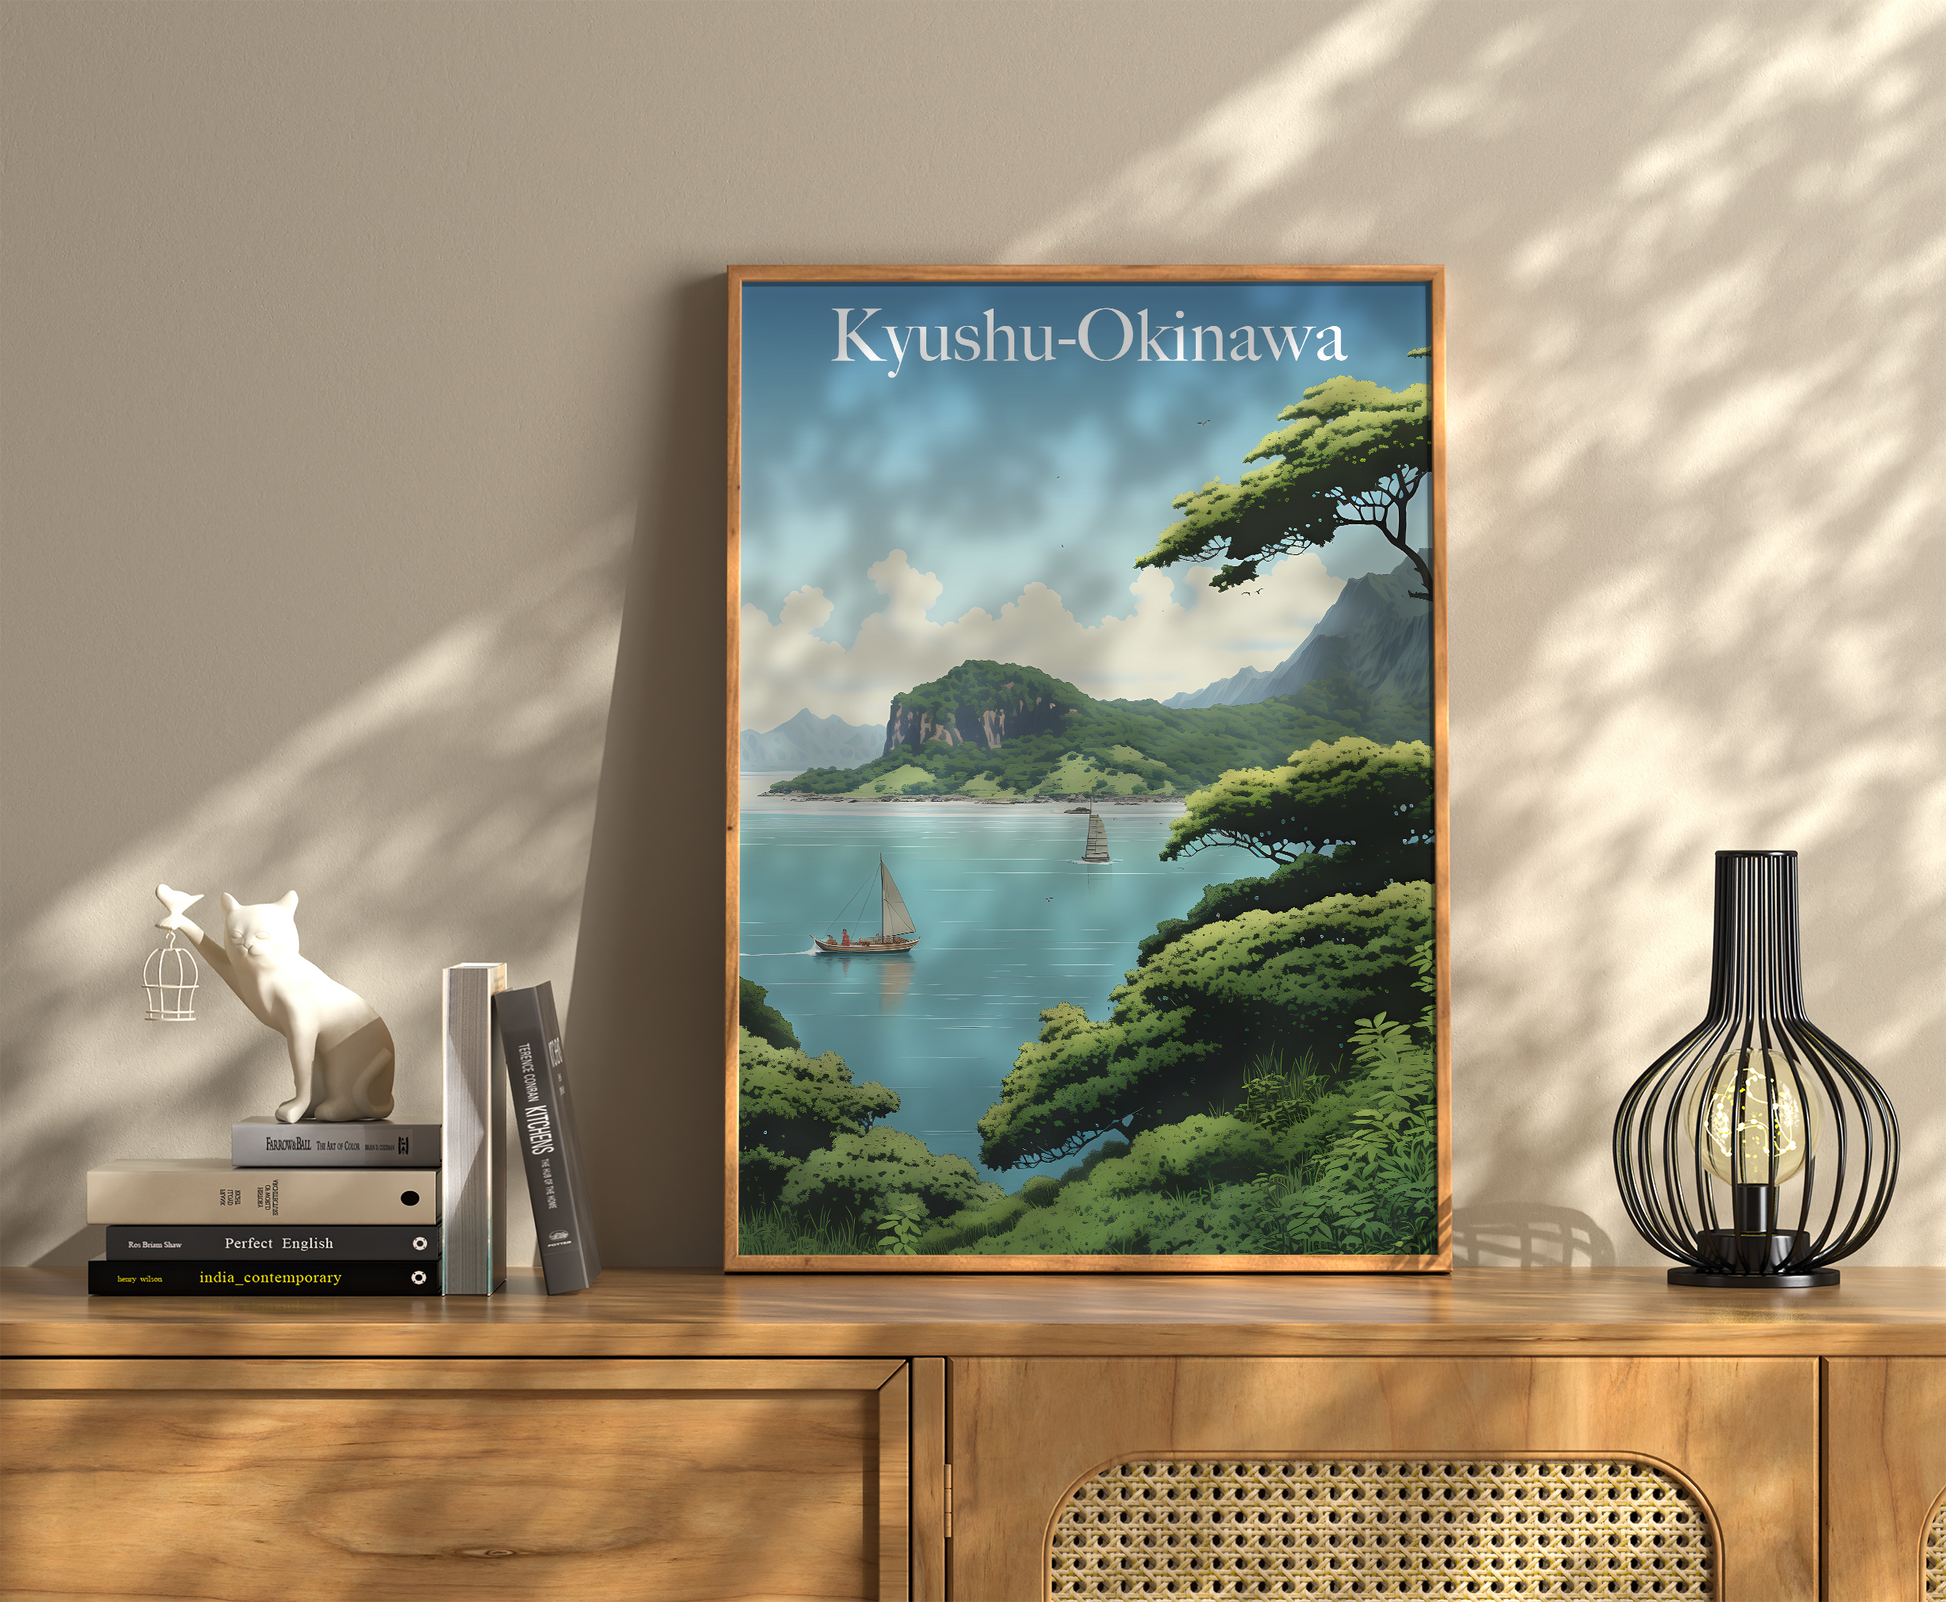 A framed travel poster of Kyushu-Okinawa on a wall above a wooden sideboard with books and a vase.